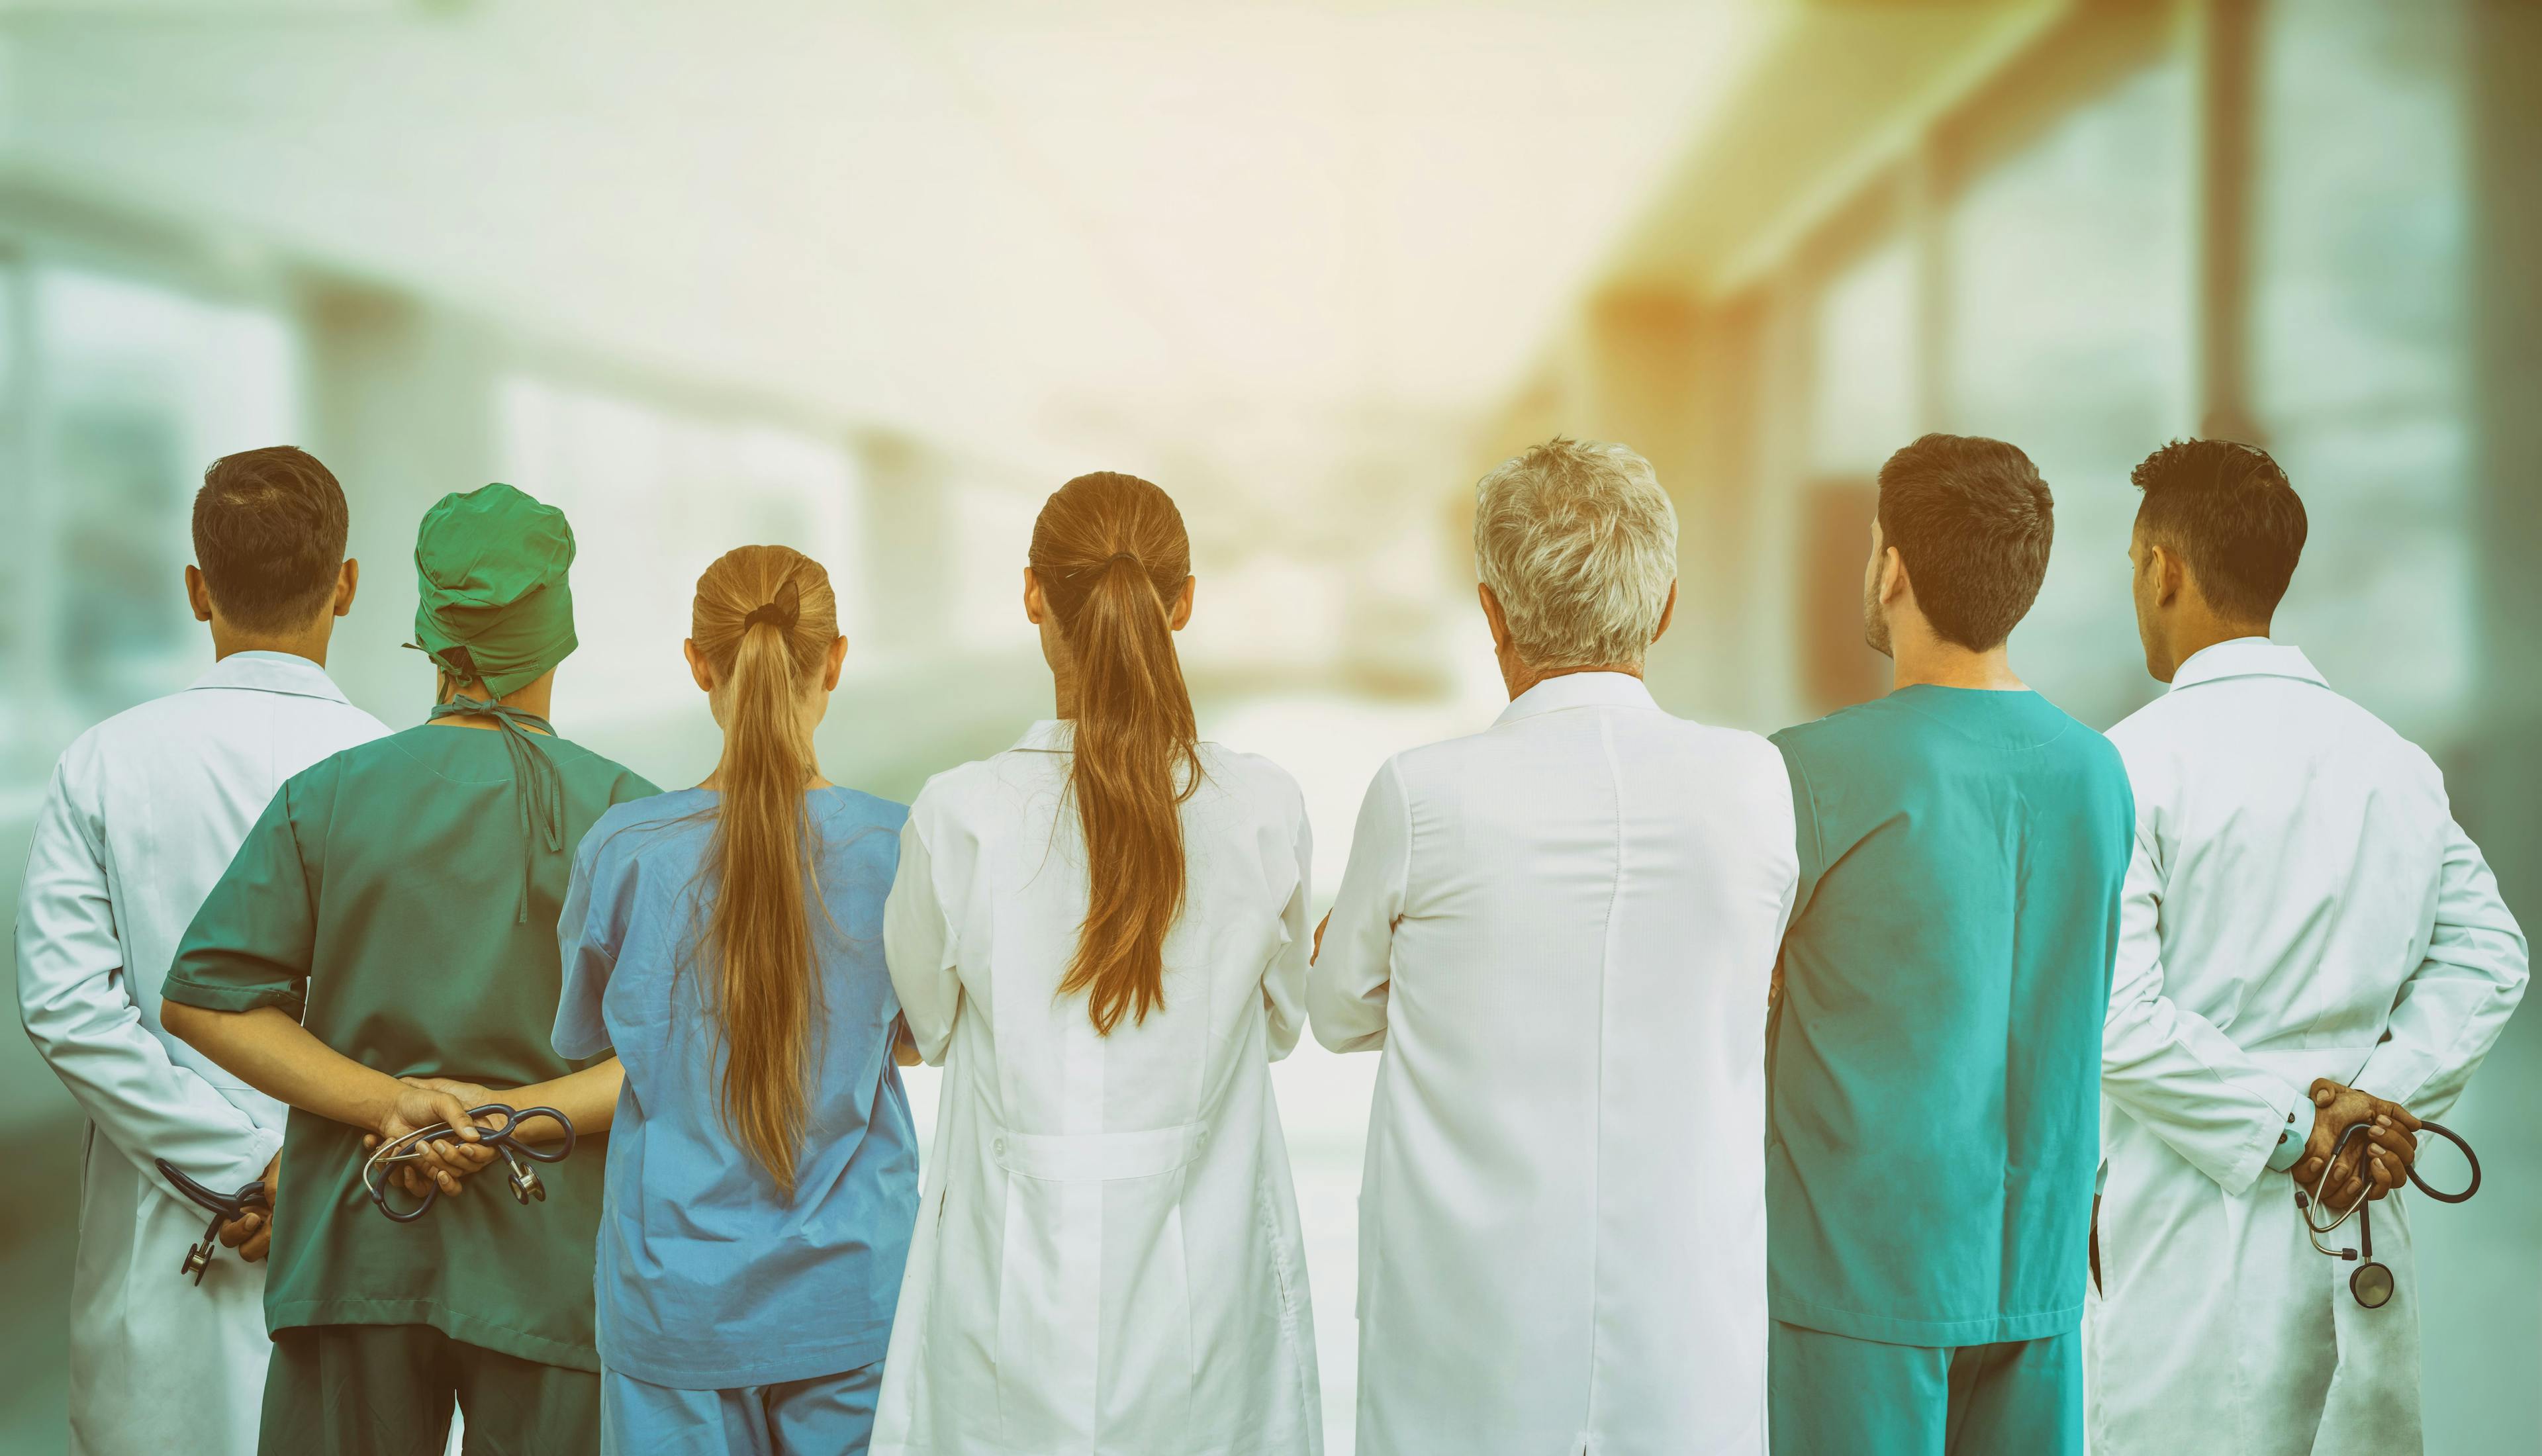 Value-based Care After COVID-19: What Healthcare Leaders Need to Know